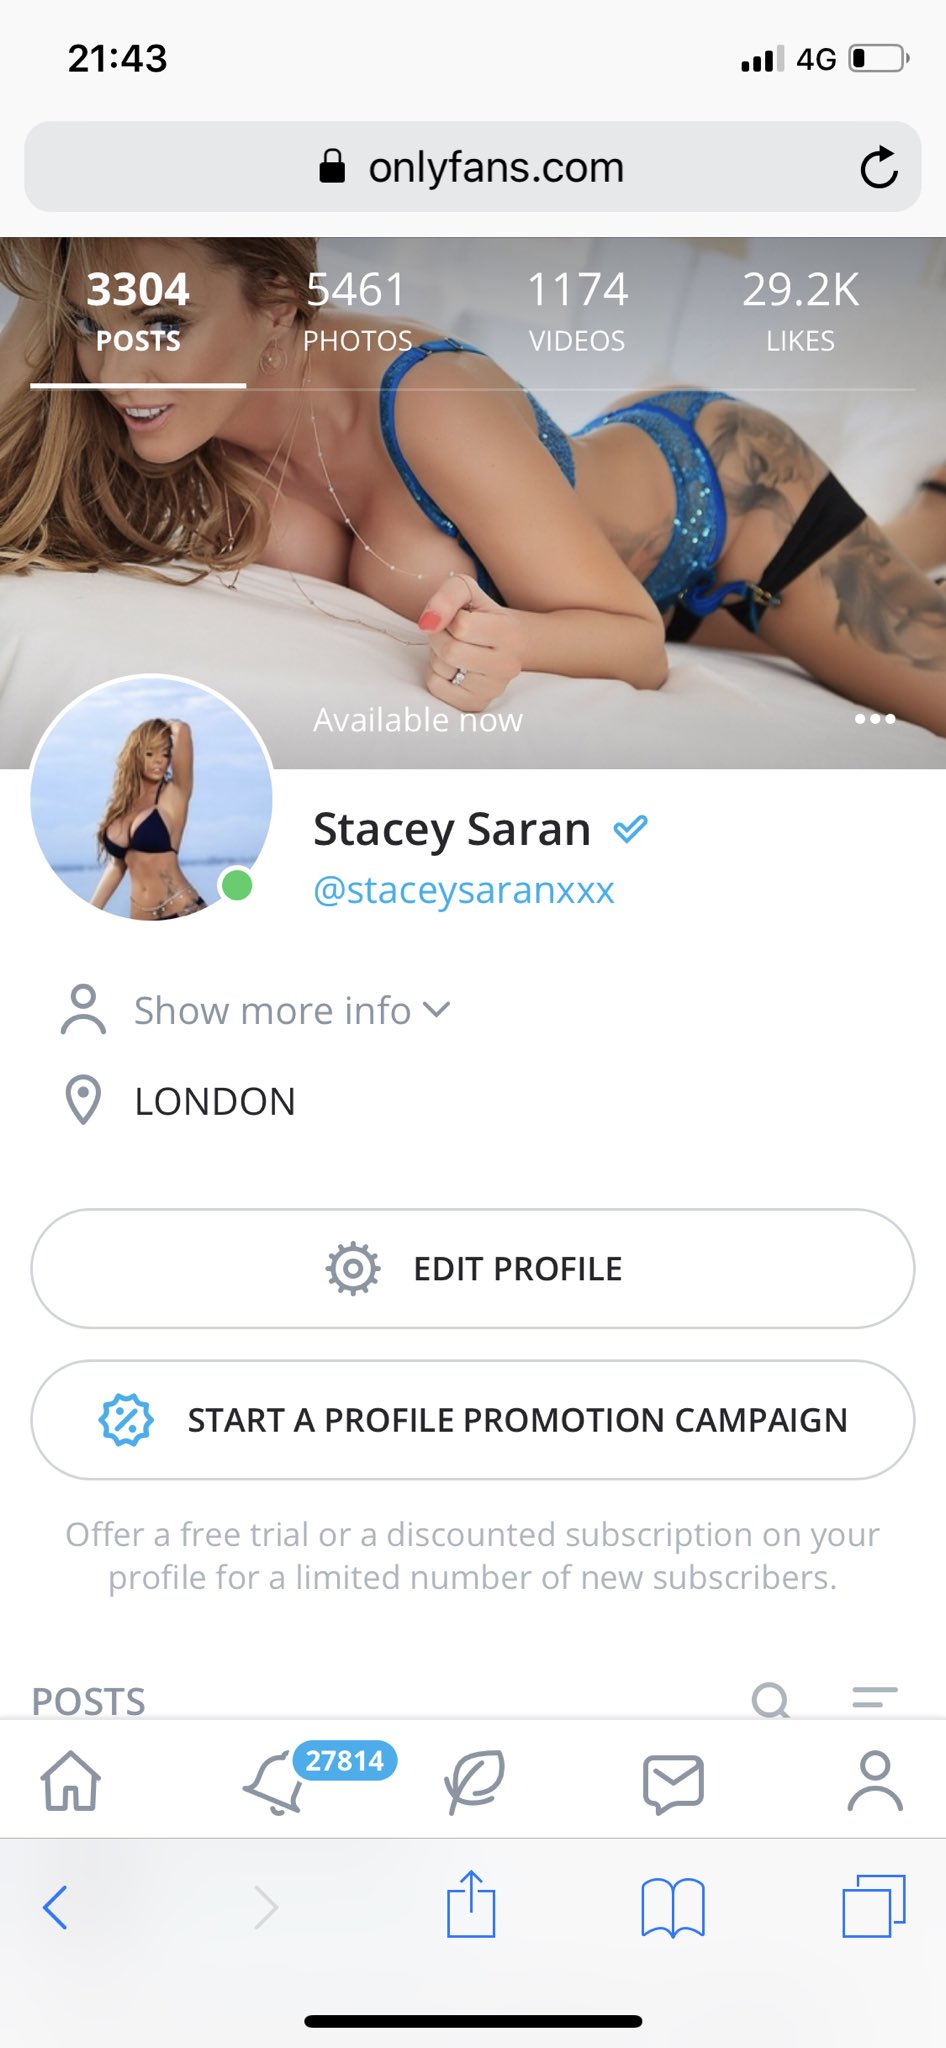 How To Sign Up For Onlyfans Account